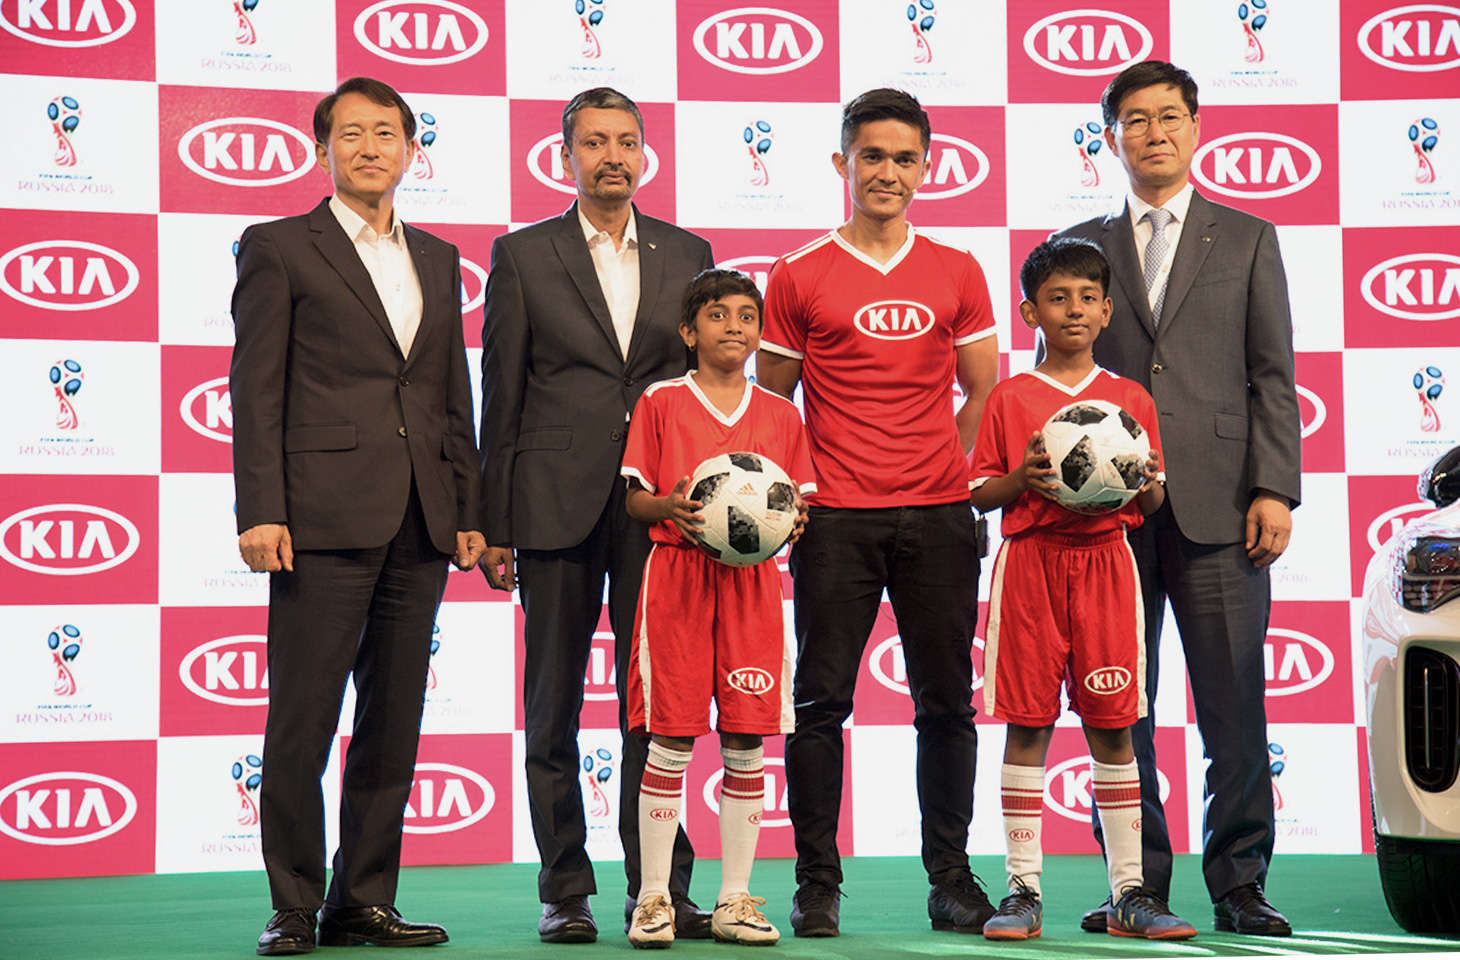 kia official match ball carriers 2 kids from india for the first time at fifa world cup